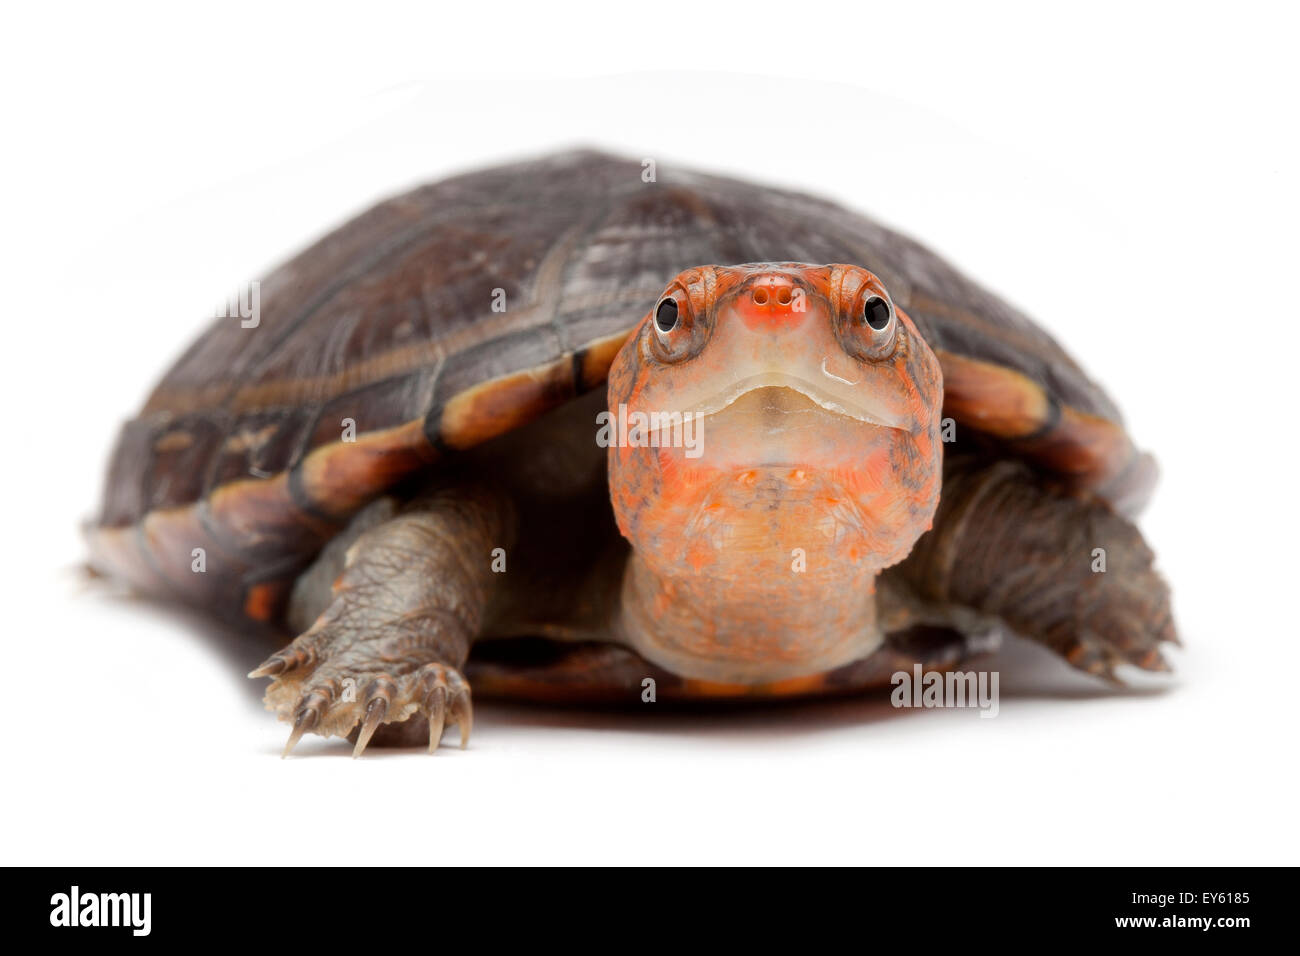 Red-cheeked Mud Turtle on white background Stock Photo